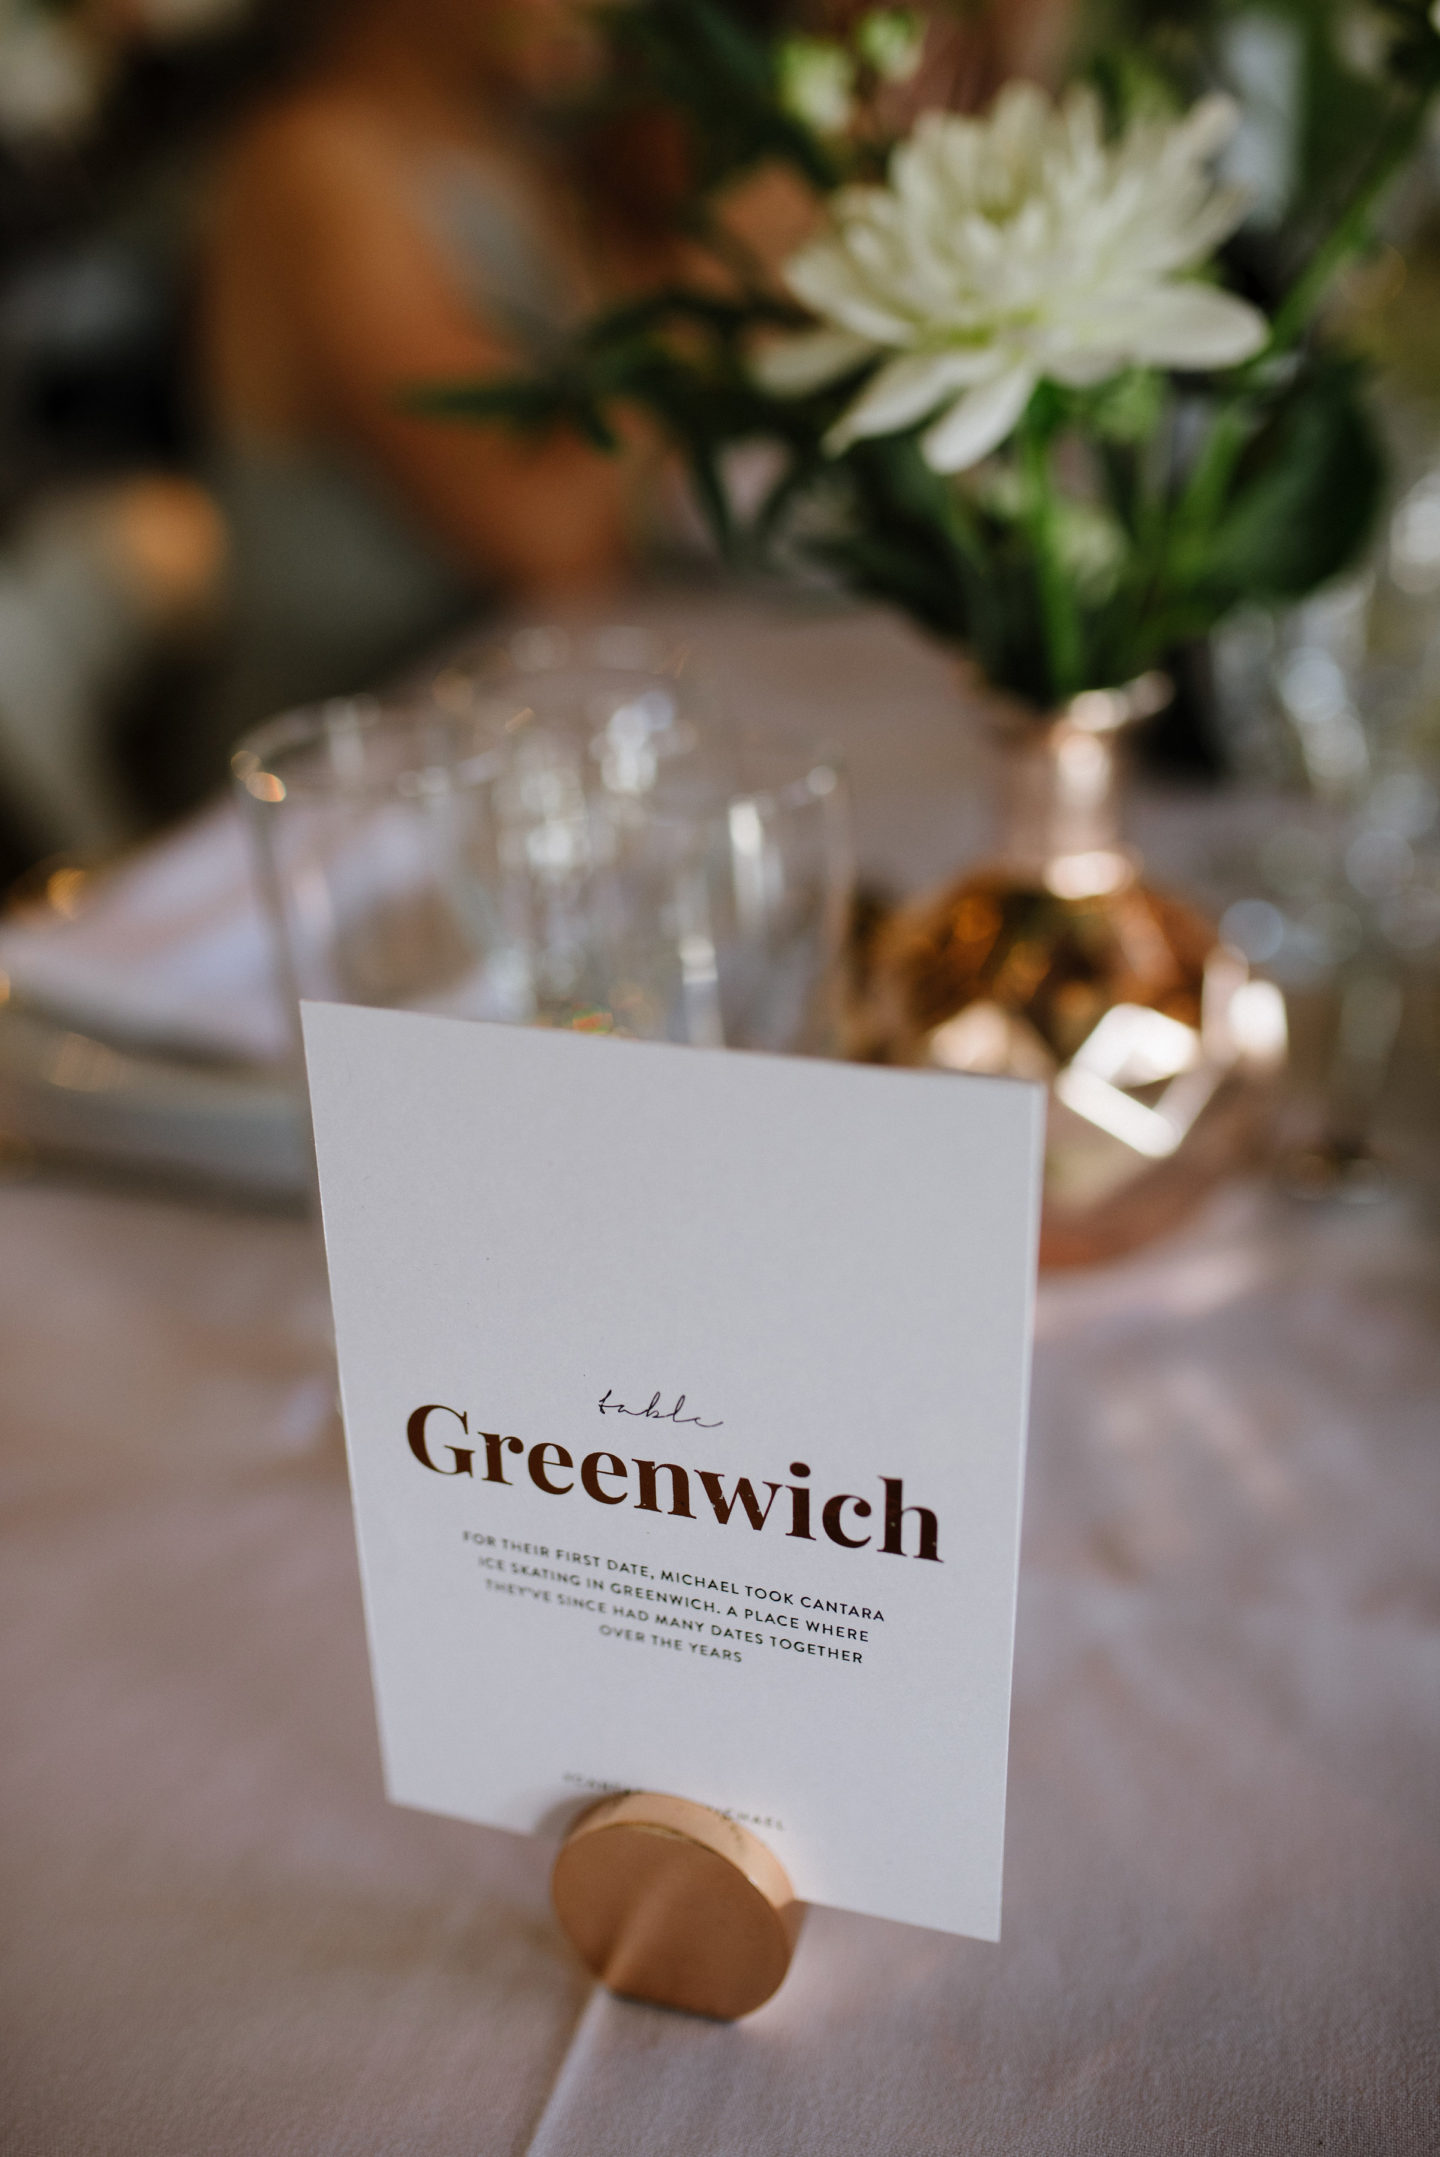 Modern, simple table names on a copper stand. A Modern, Industrial Warehouse Wedding with Personal Touches